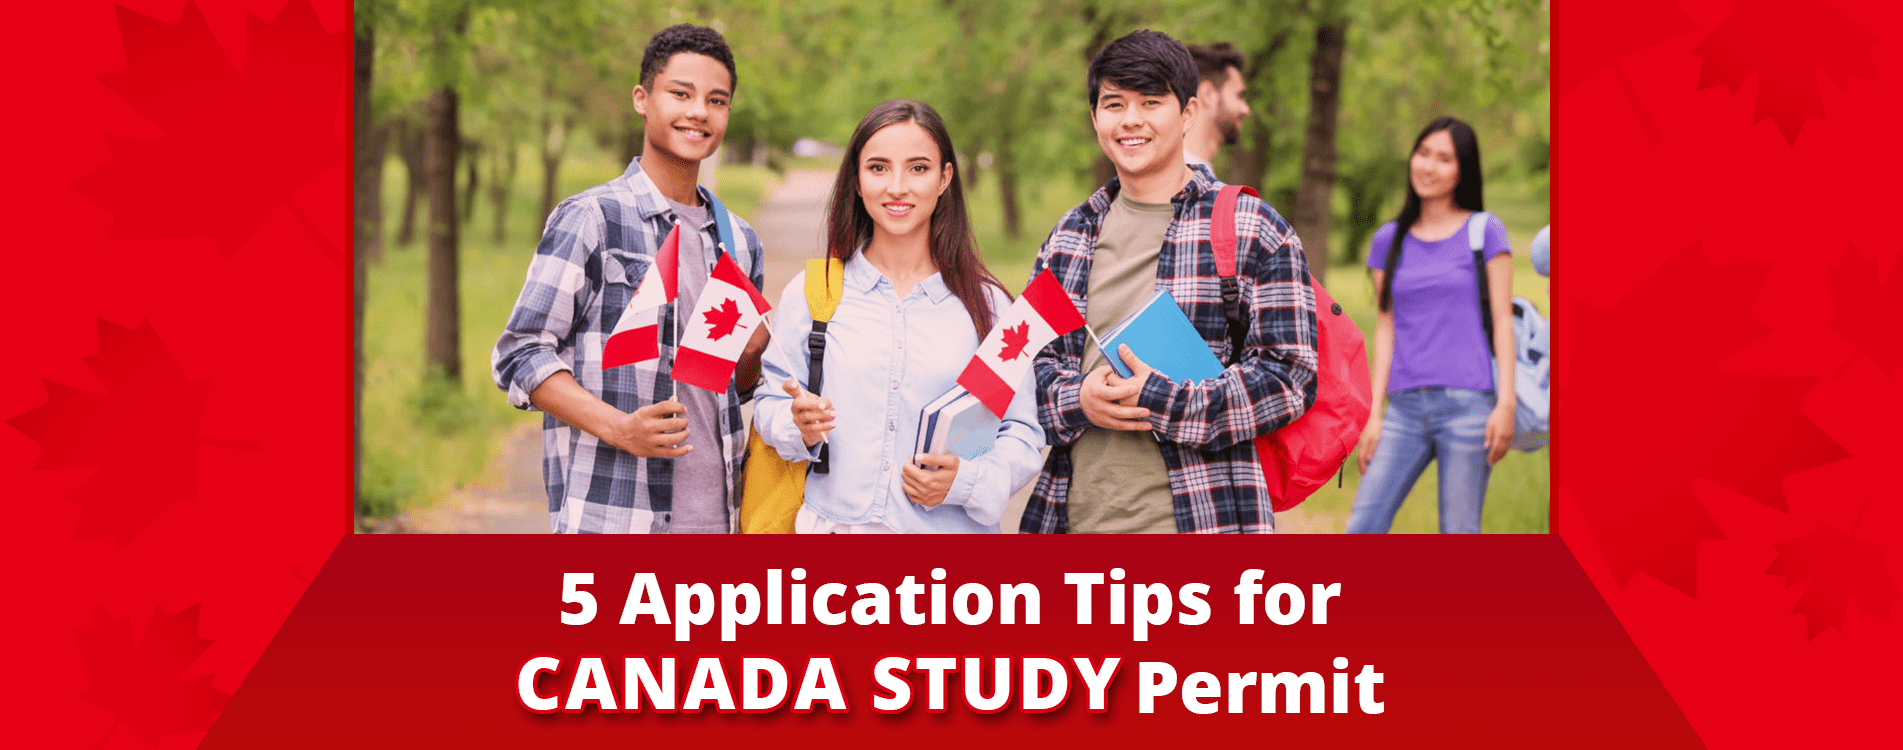 5 Application Tips for Canada Study Permit